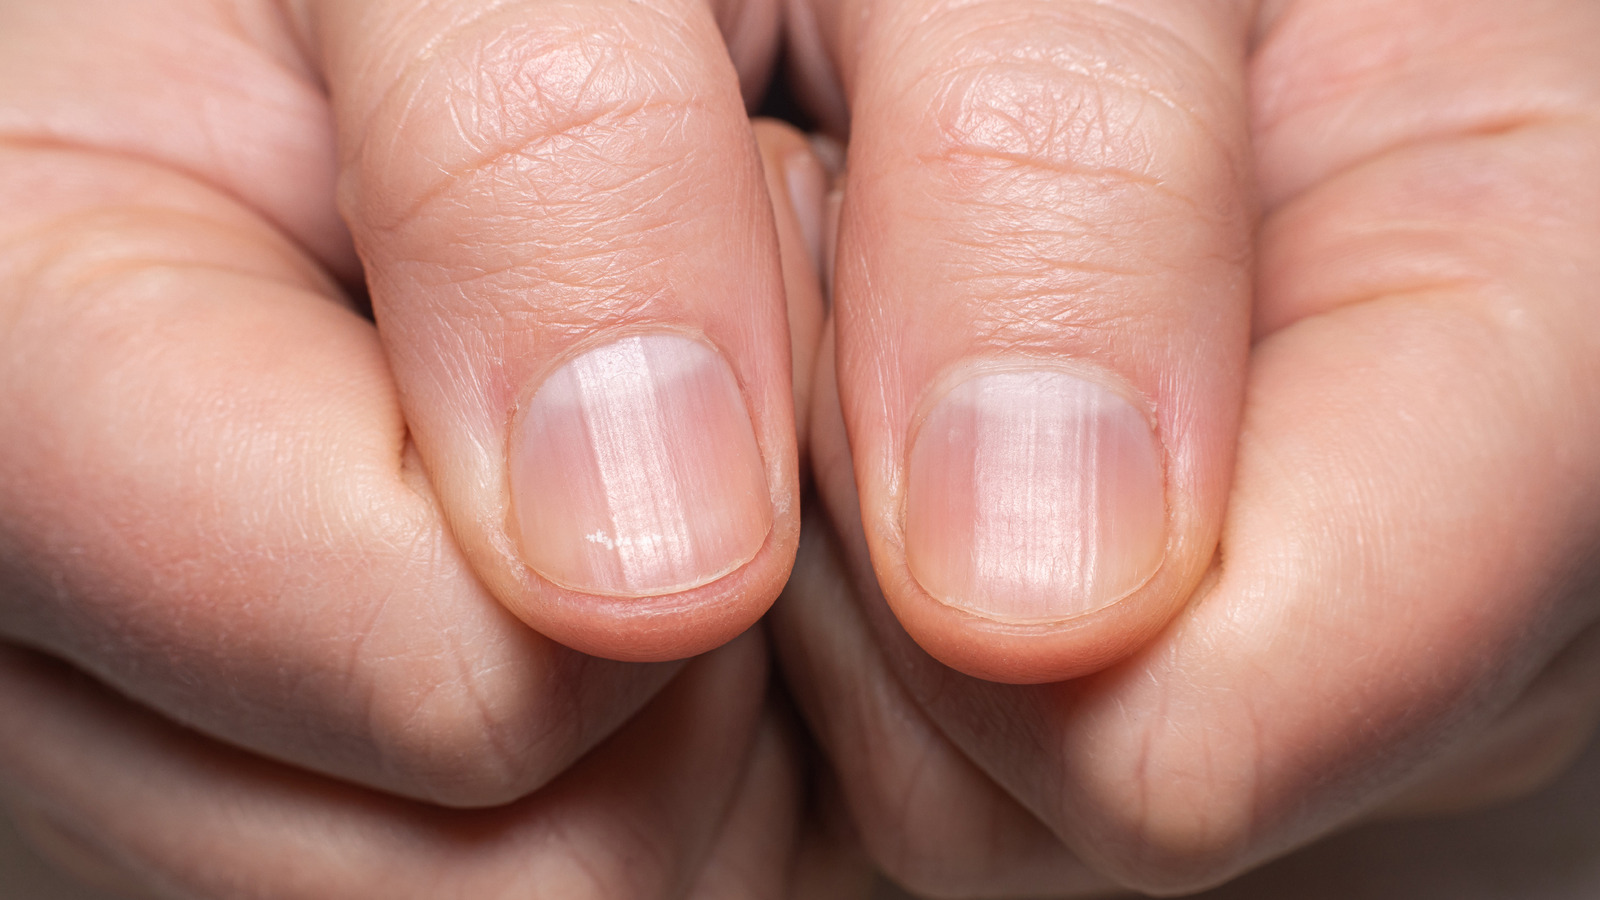 Why can't I grow my fingernails? They split or just crack to where I have  to file them down to nothing. What am I doing wrong? - Quora